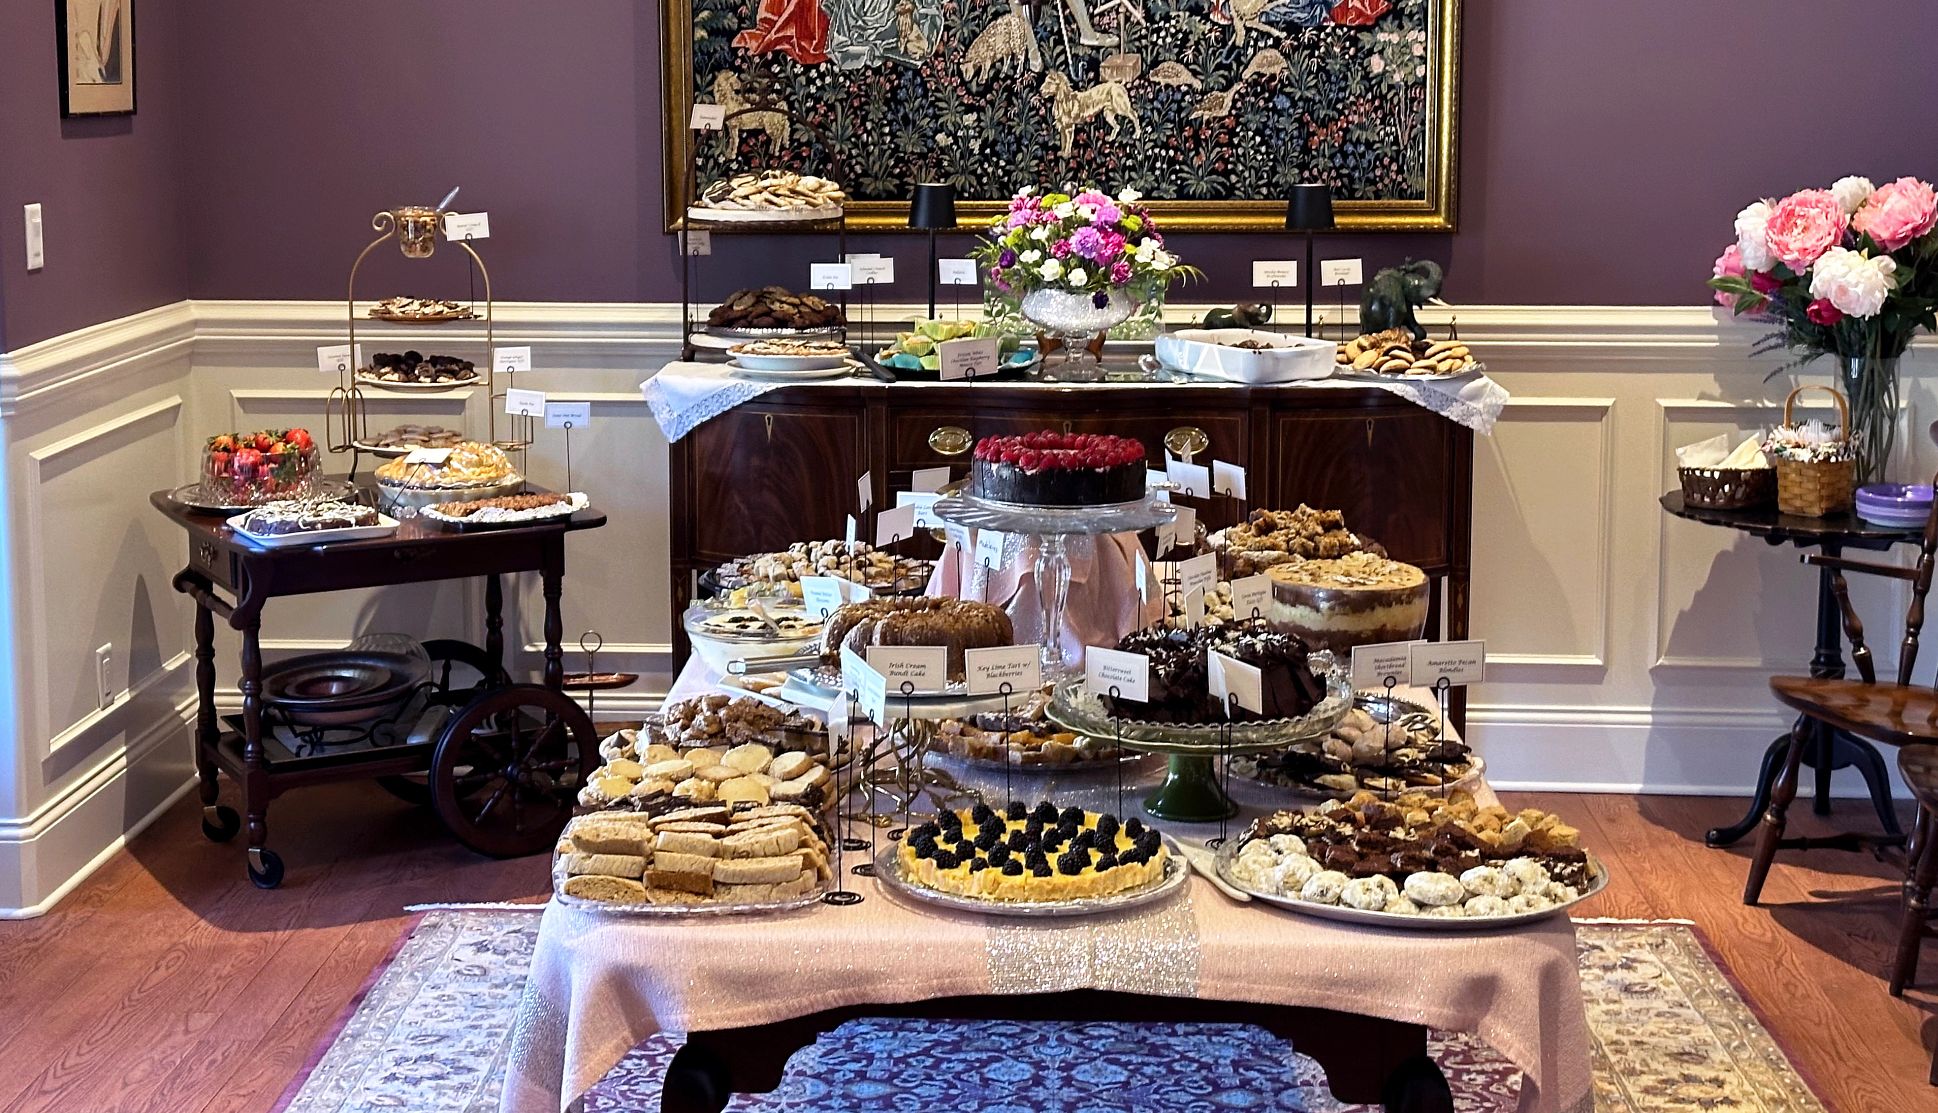 baked goods in displayed on a tabletop